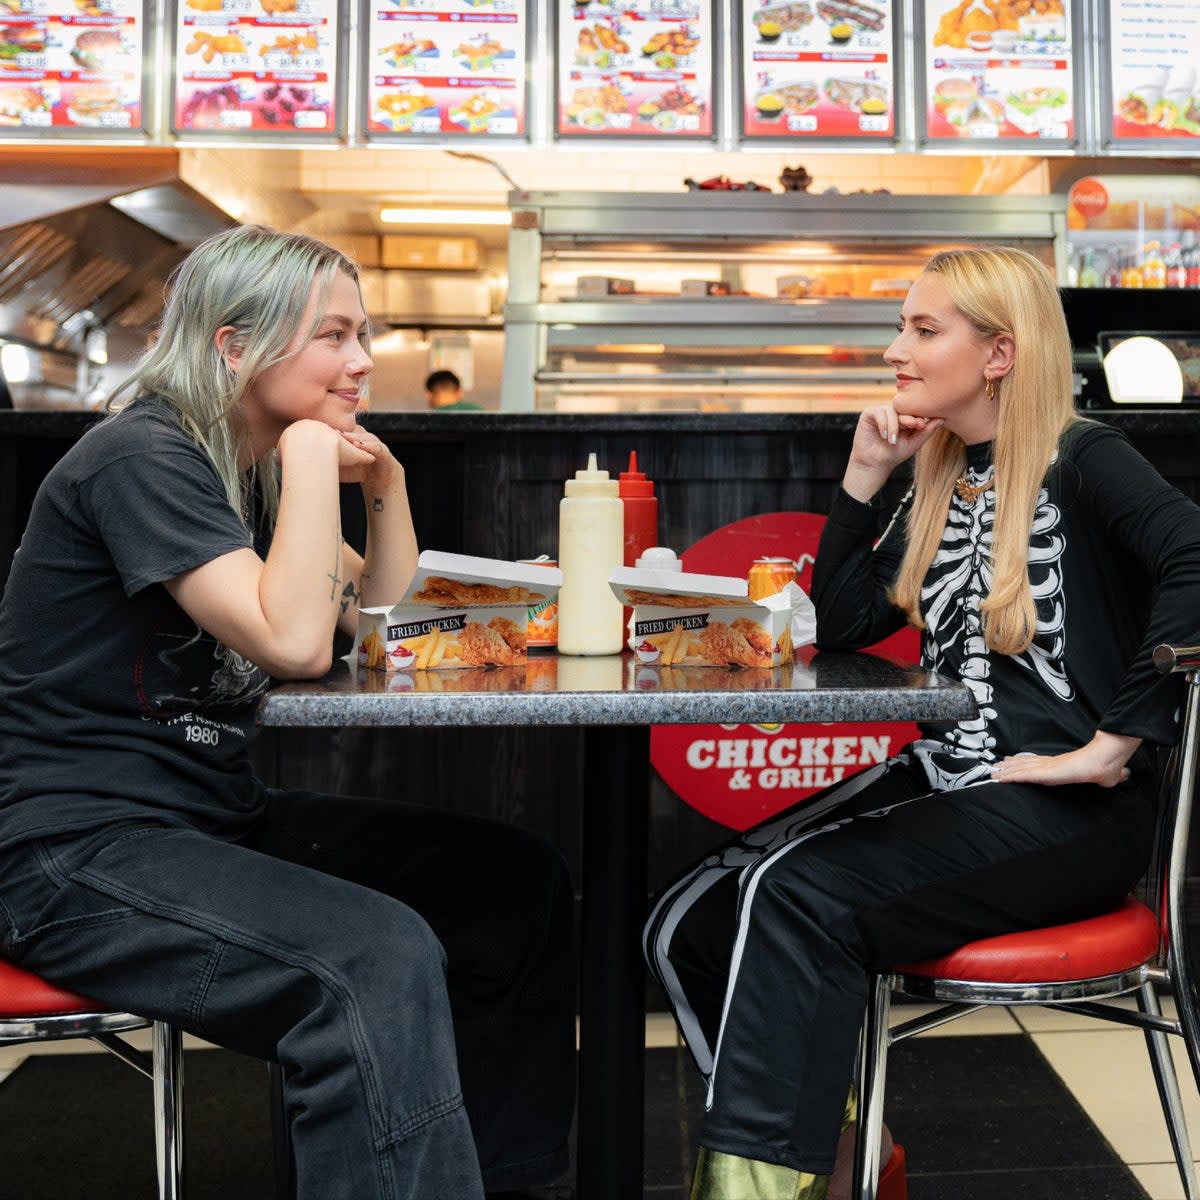 Singer Phoebe Bridgers (left) will be appearing on viral YouTube show Chicken Shop Date on Christmas Eve with host Amelia Dimoldenberg (right)  (Amelia Dimoldenberg )